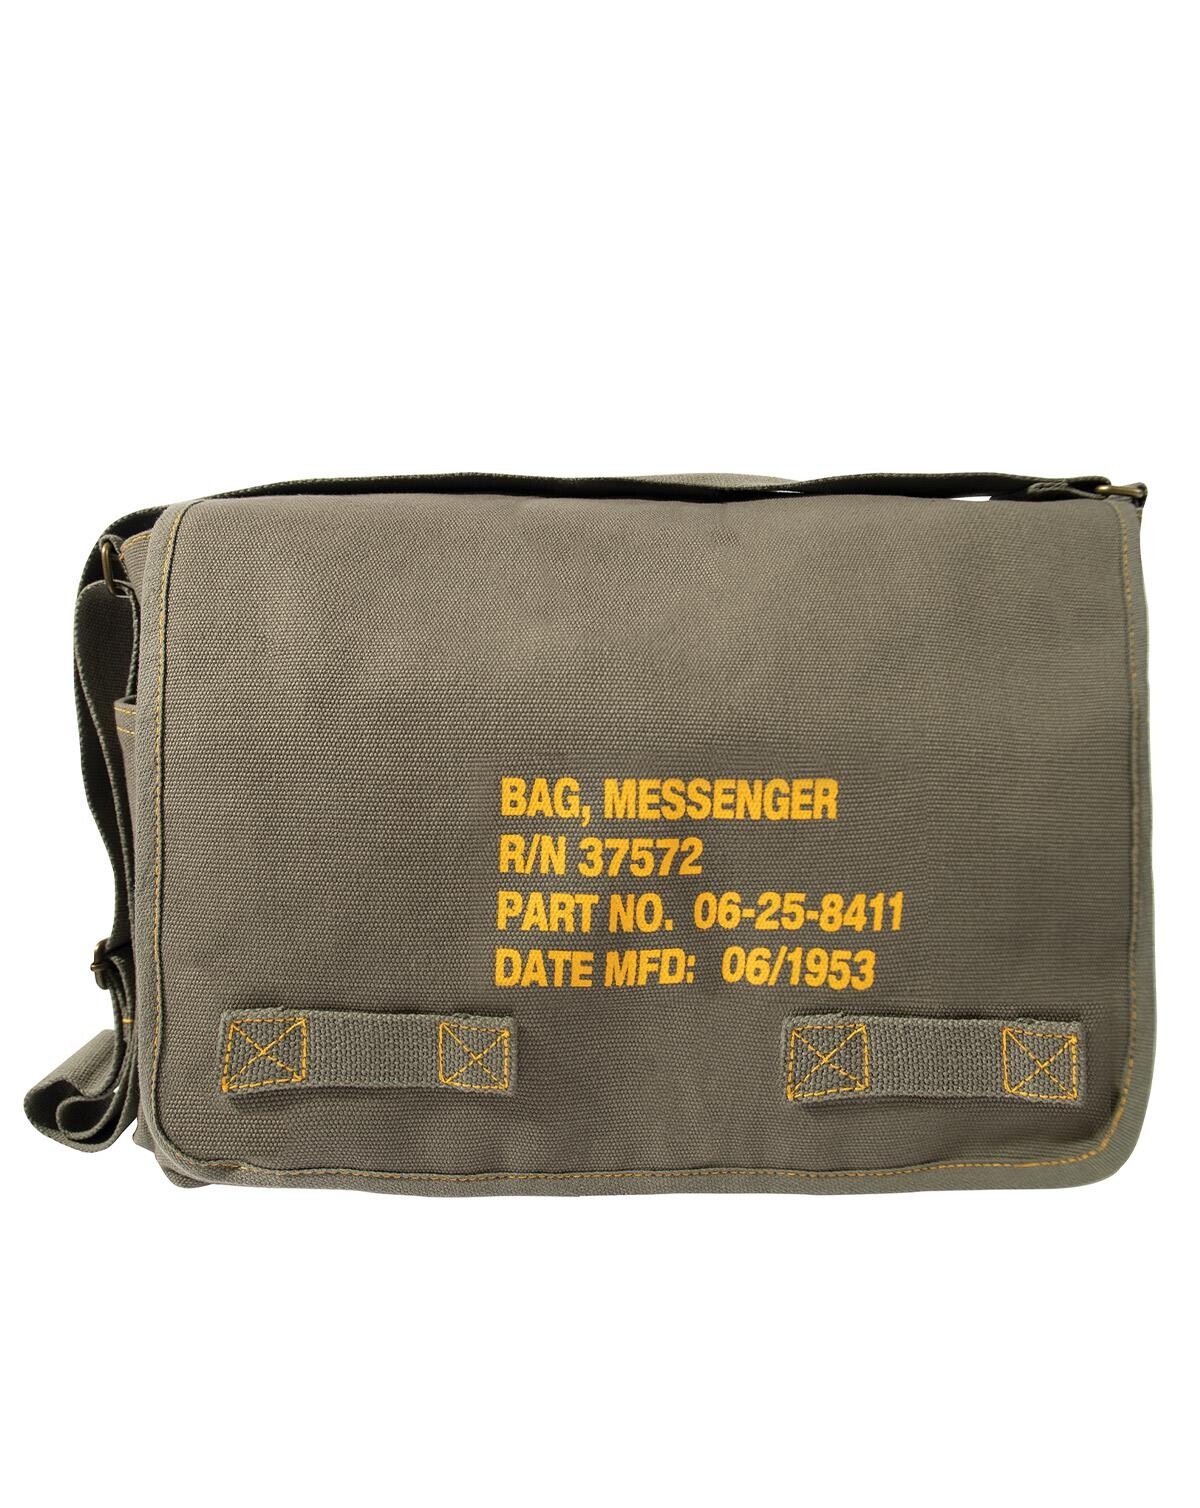 #3 - Rothco Heavyweight Canvas Classic Messenger Bag With Military Stencil (Oliven, One Size)